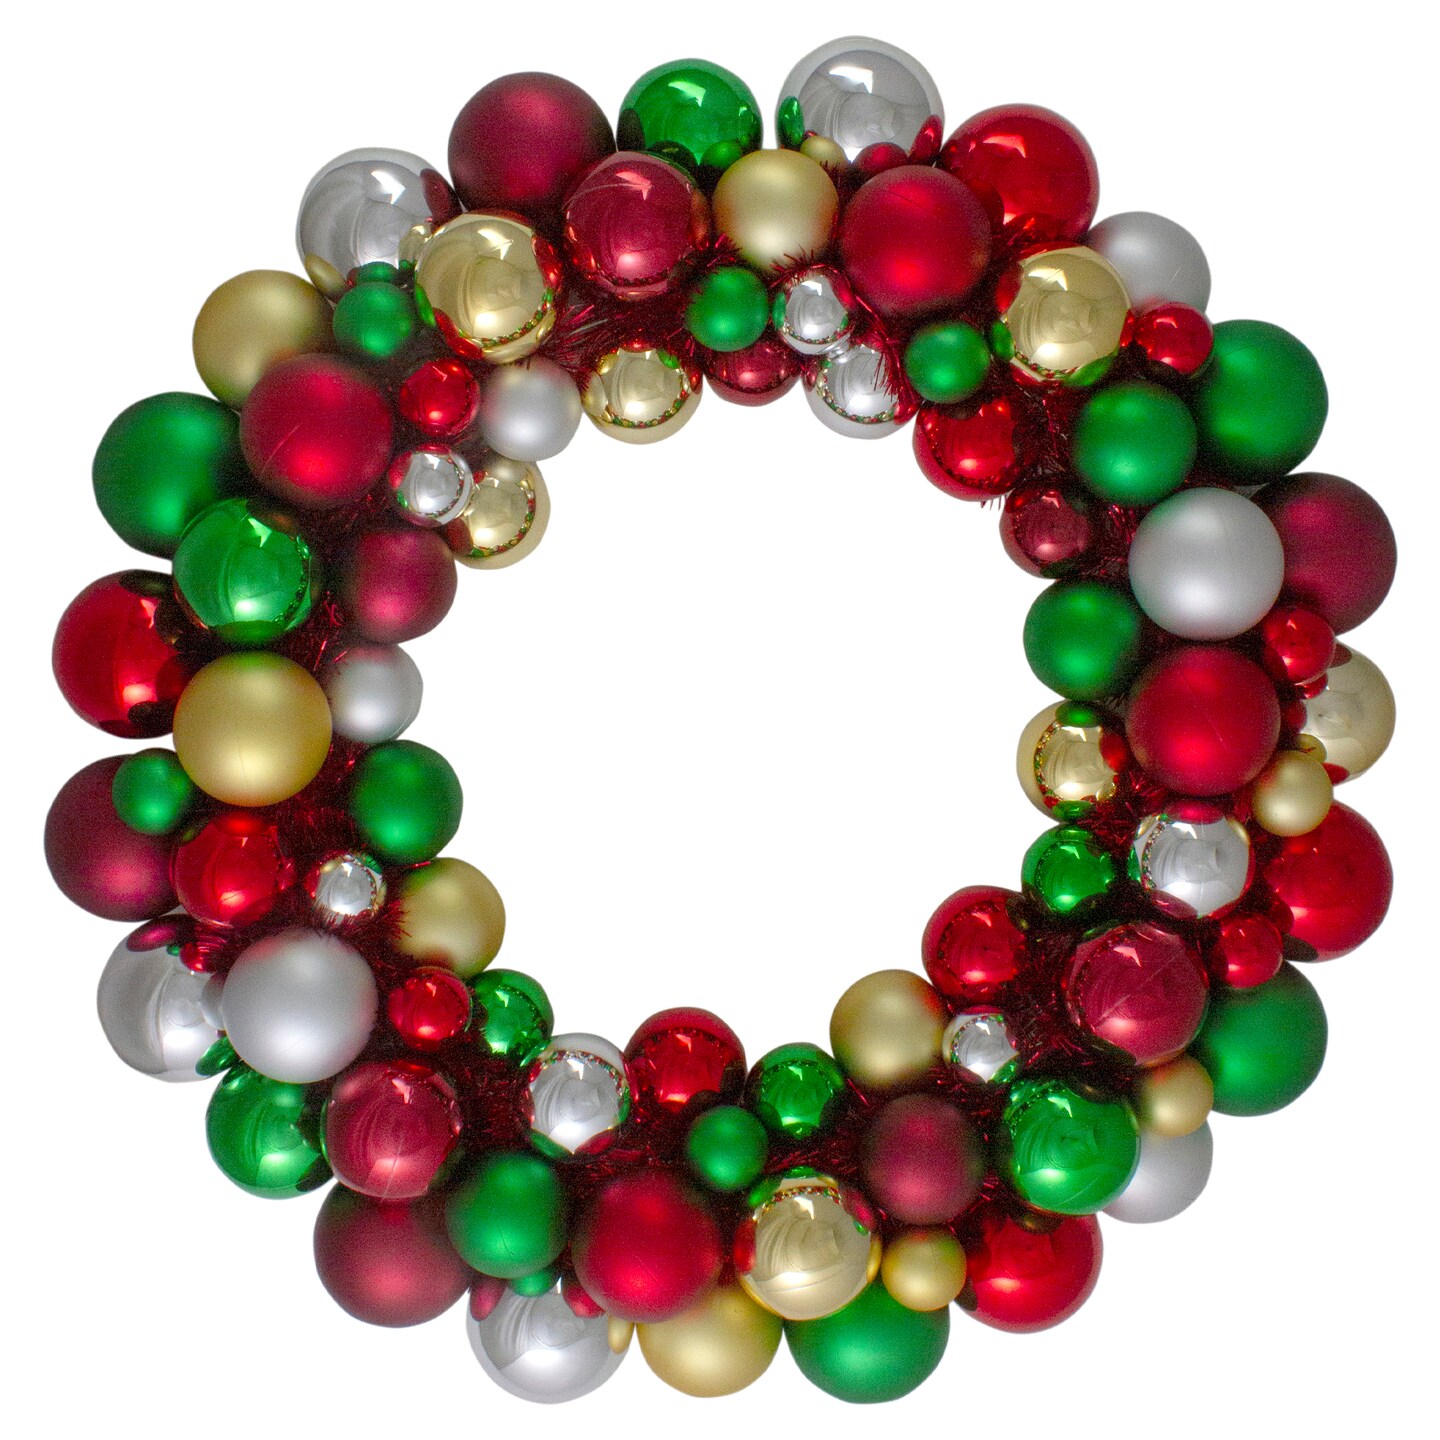 Northlight Traditional Colors 2-Finish Shatterproof Ball Christmas Wreath, 24-Inch